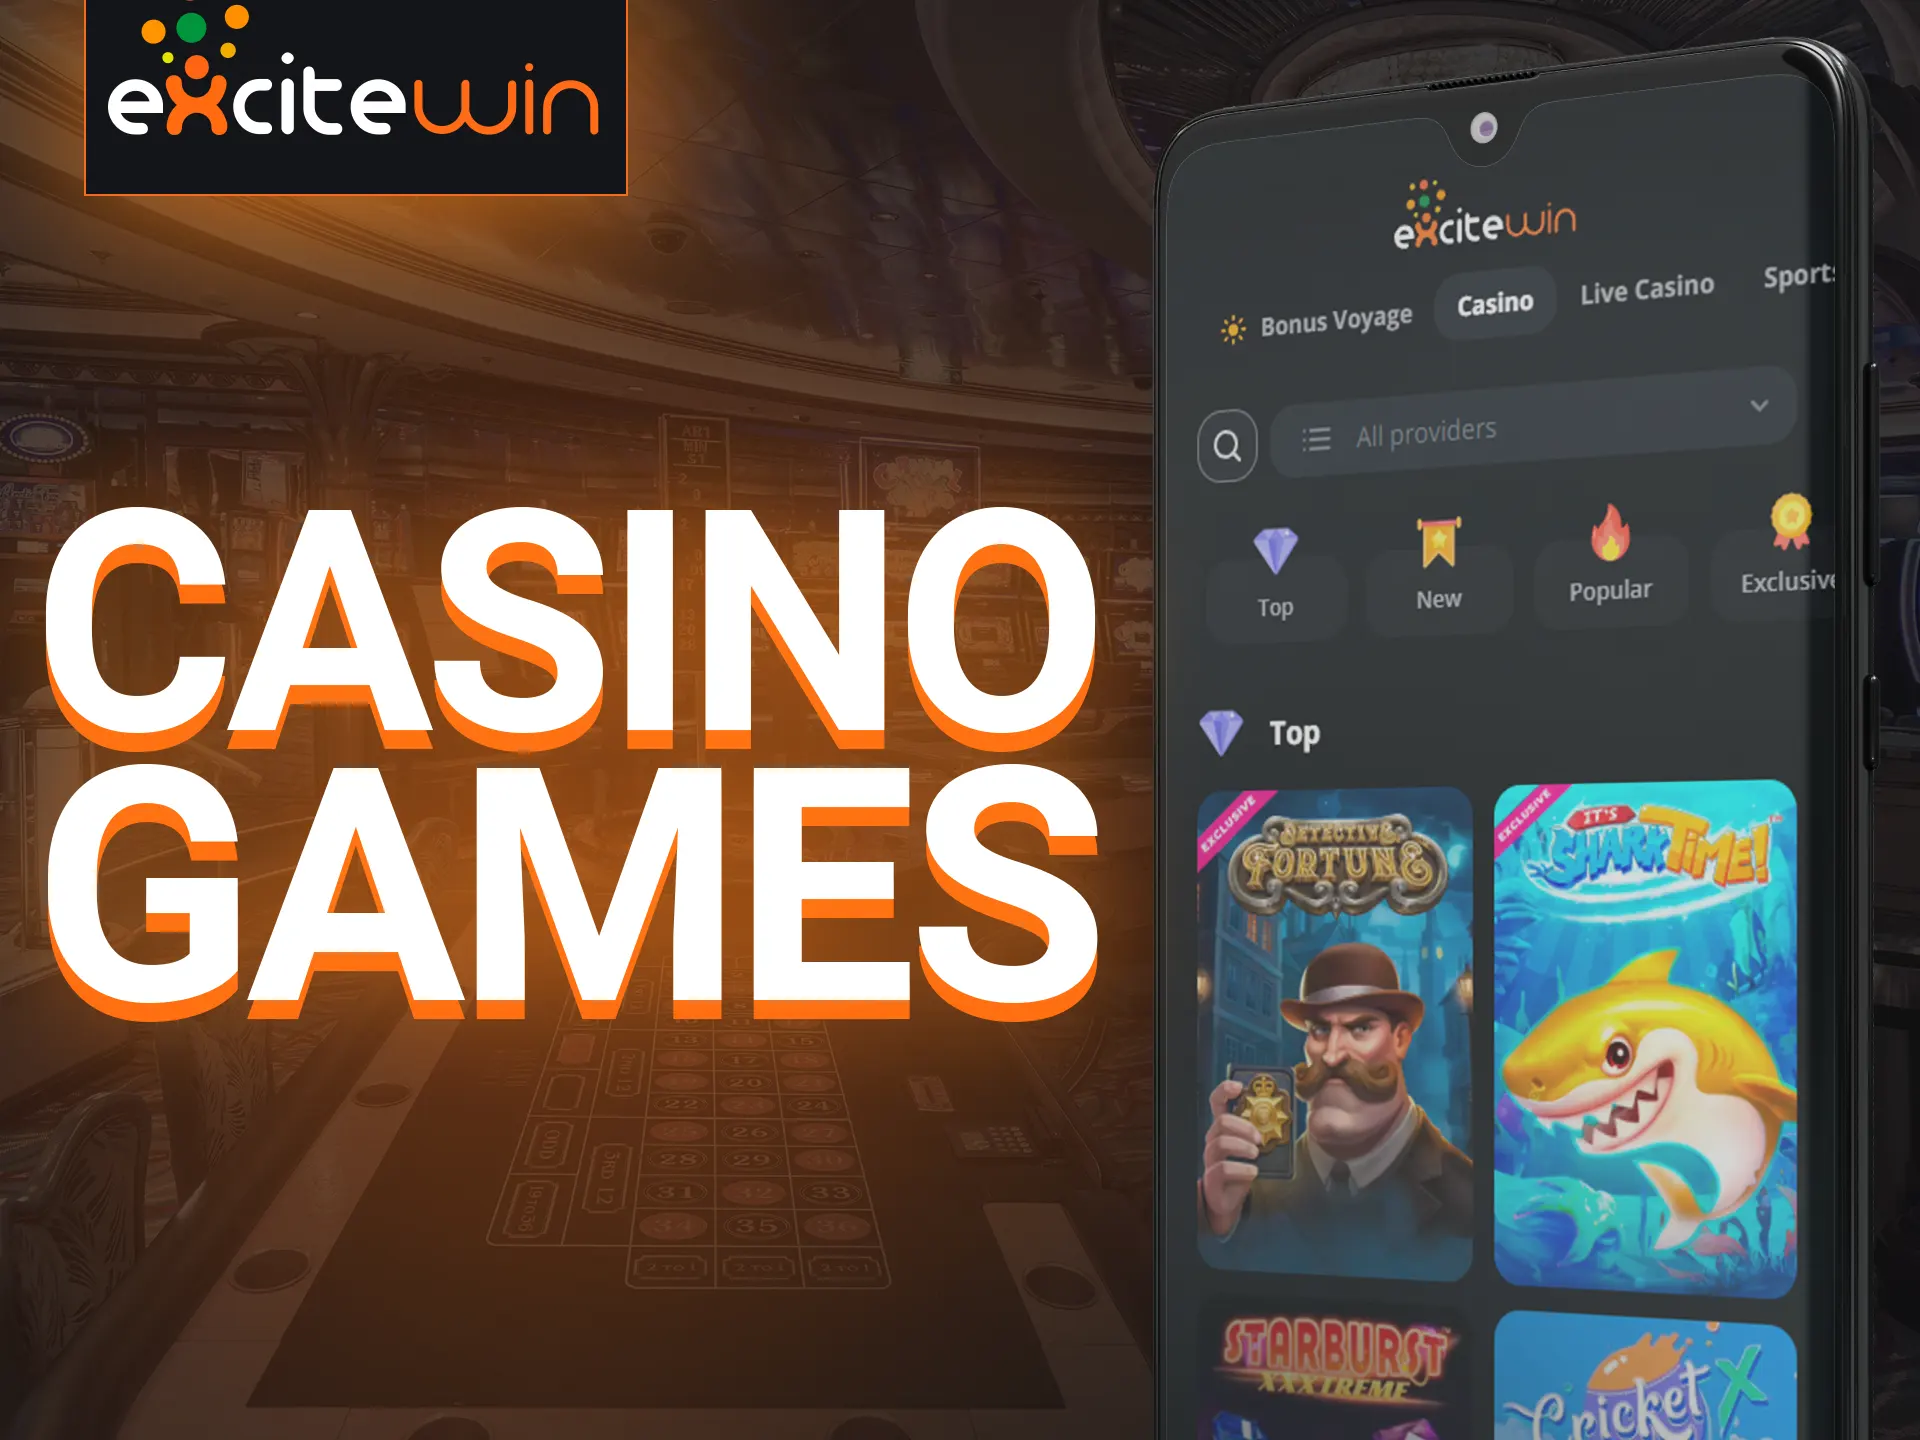 Check out the most popular Excitewin casino games.